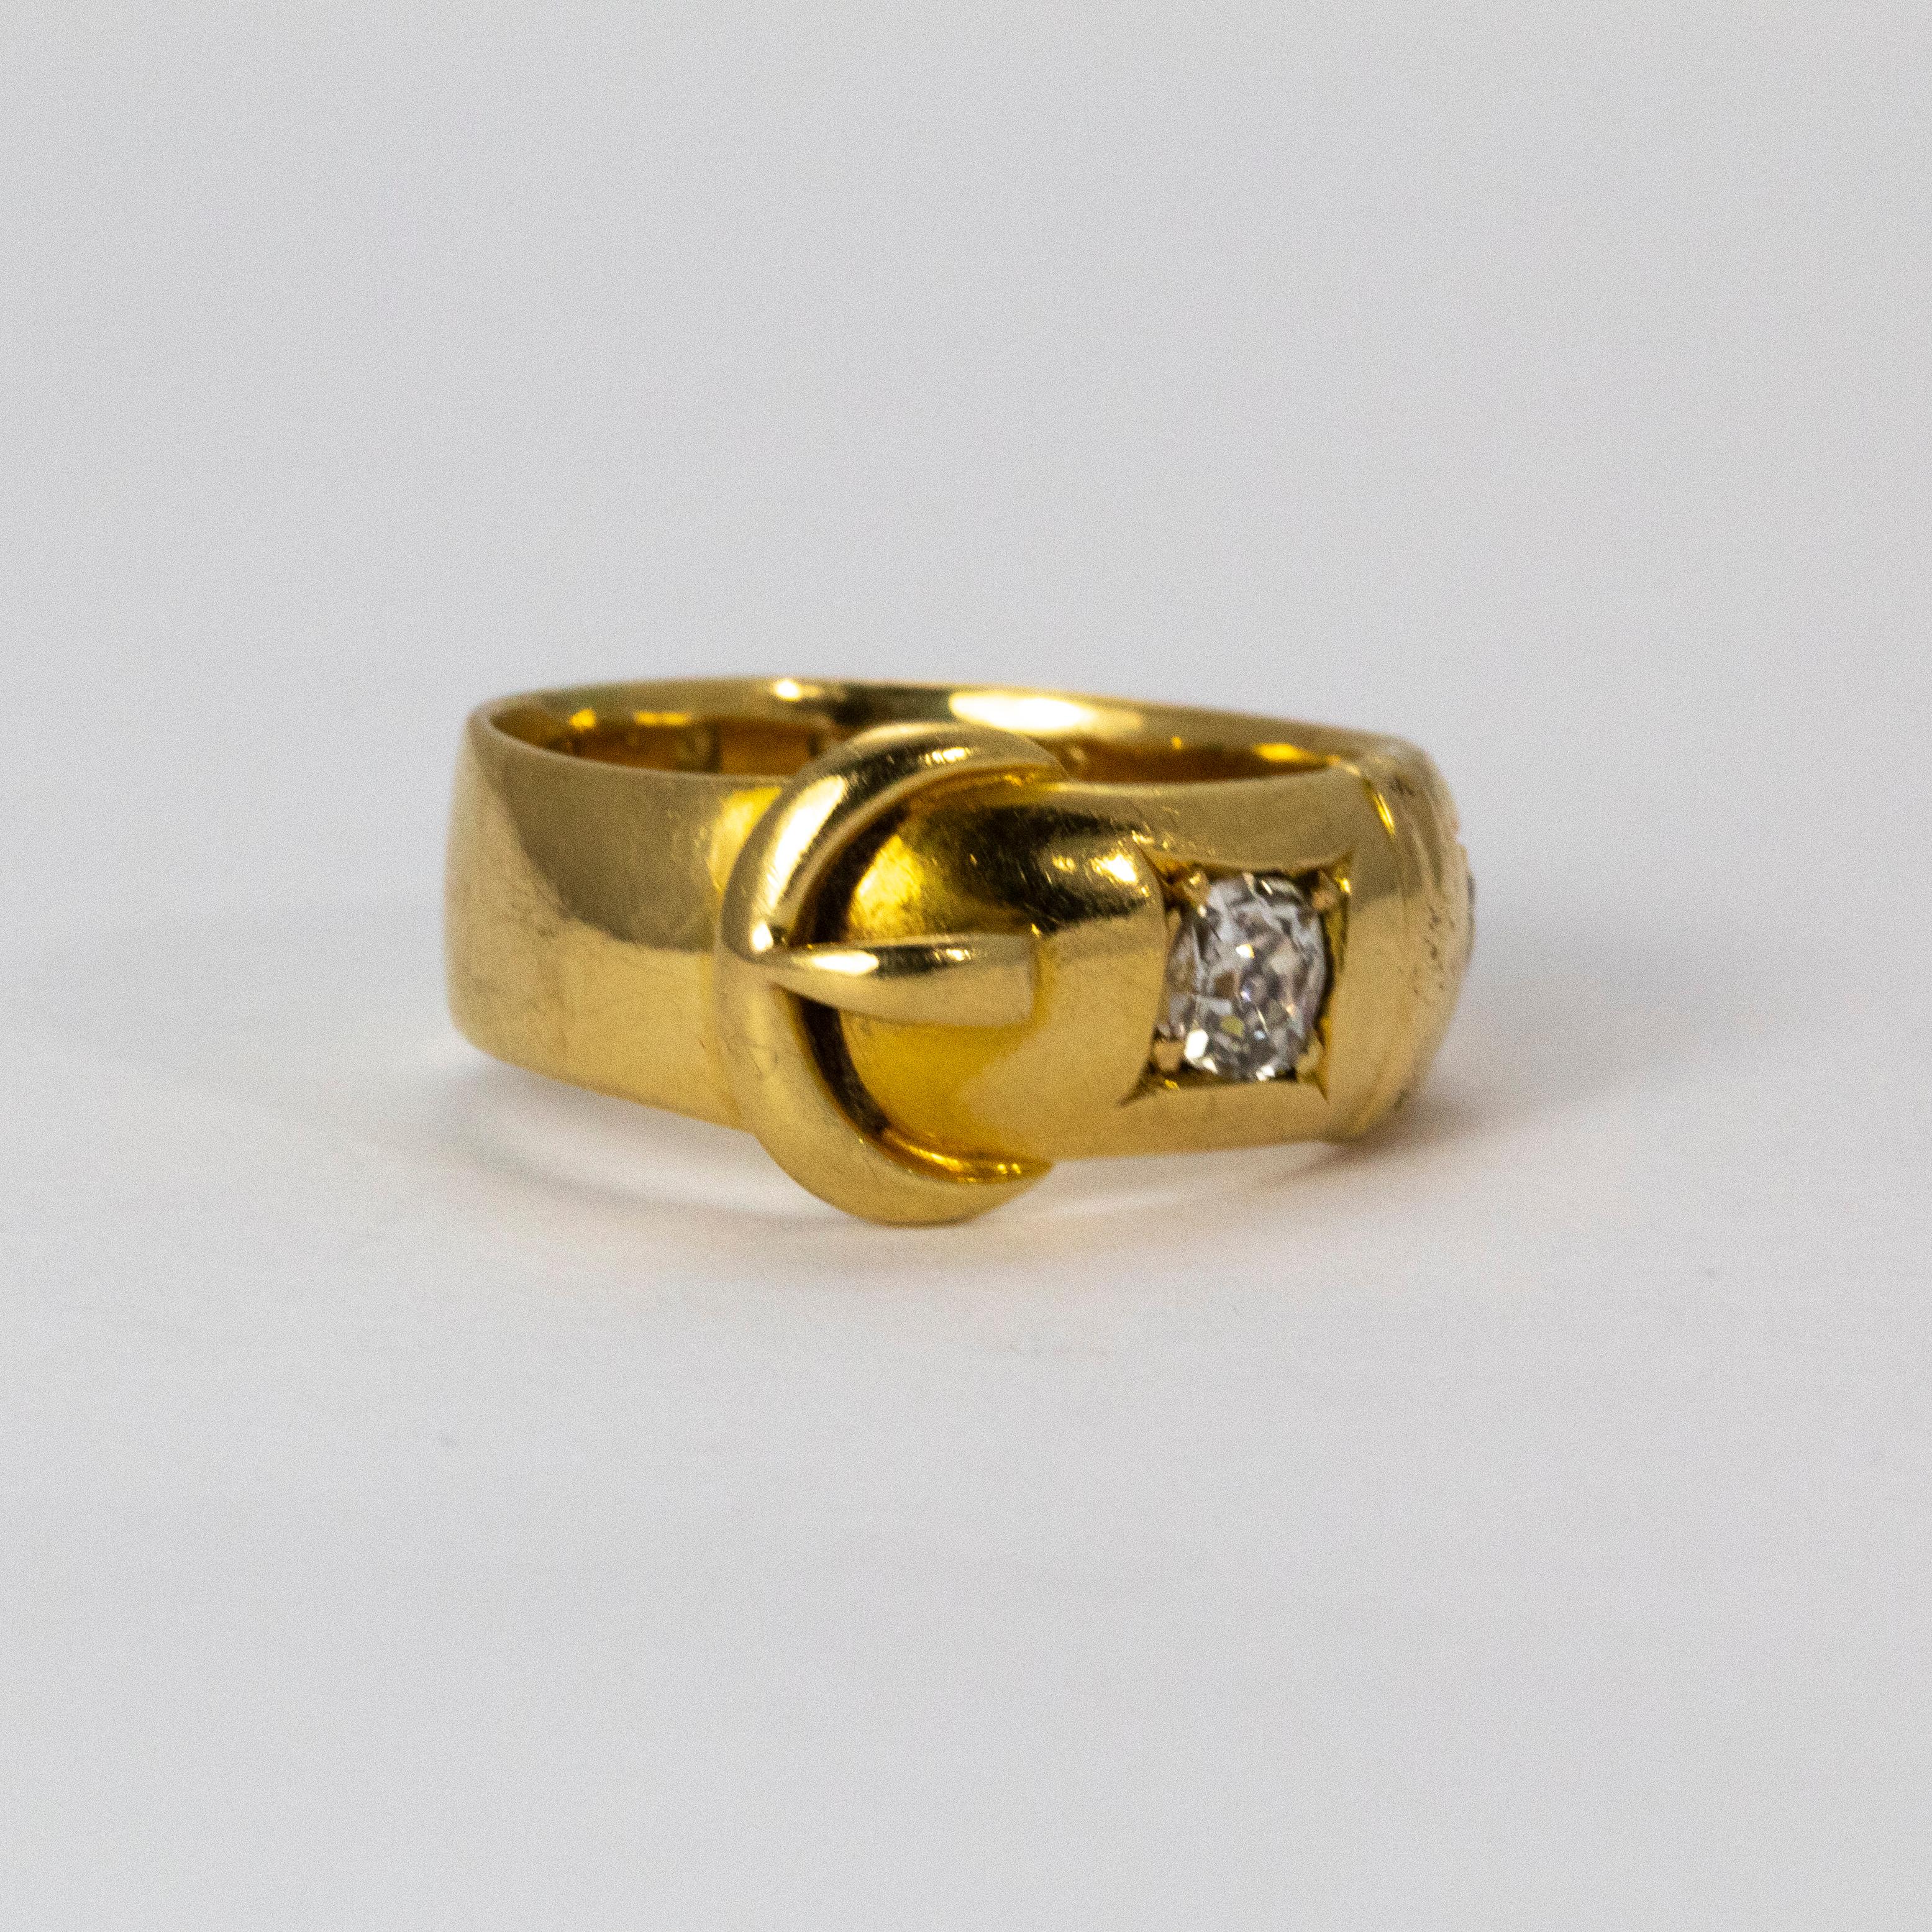 A beautiful Victorian 18 karat yellow gold diamond ring with buckle motif. The buckle became a popular symbol for jewellery in the 19th century; used to represent strength, loyalty, love, and protection to a loved one. The two brilliant old European